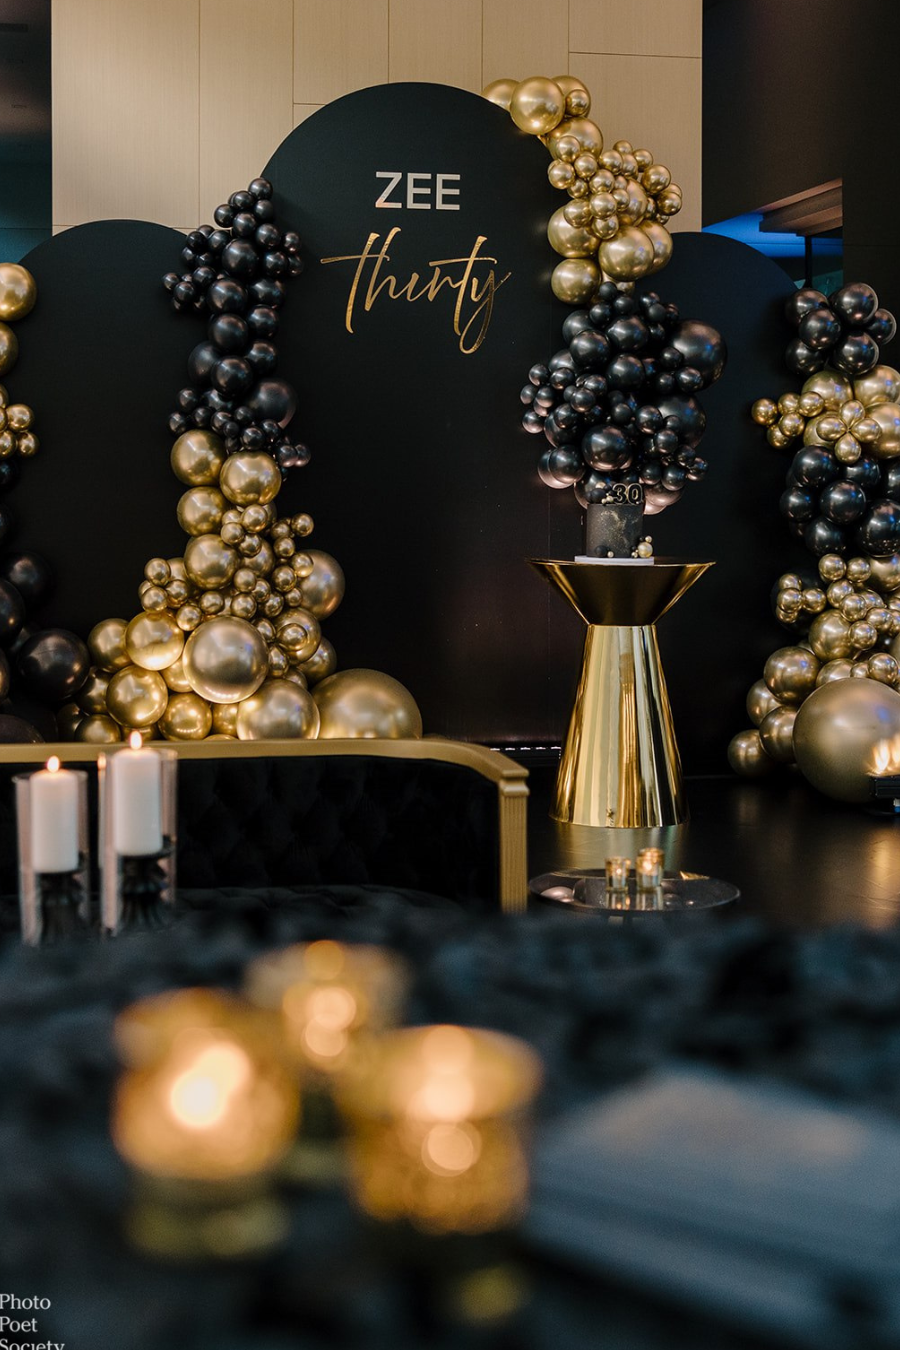 black-gold-thirty-birthday-party-backdrop-balloons-cake-candles